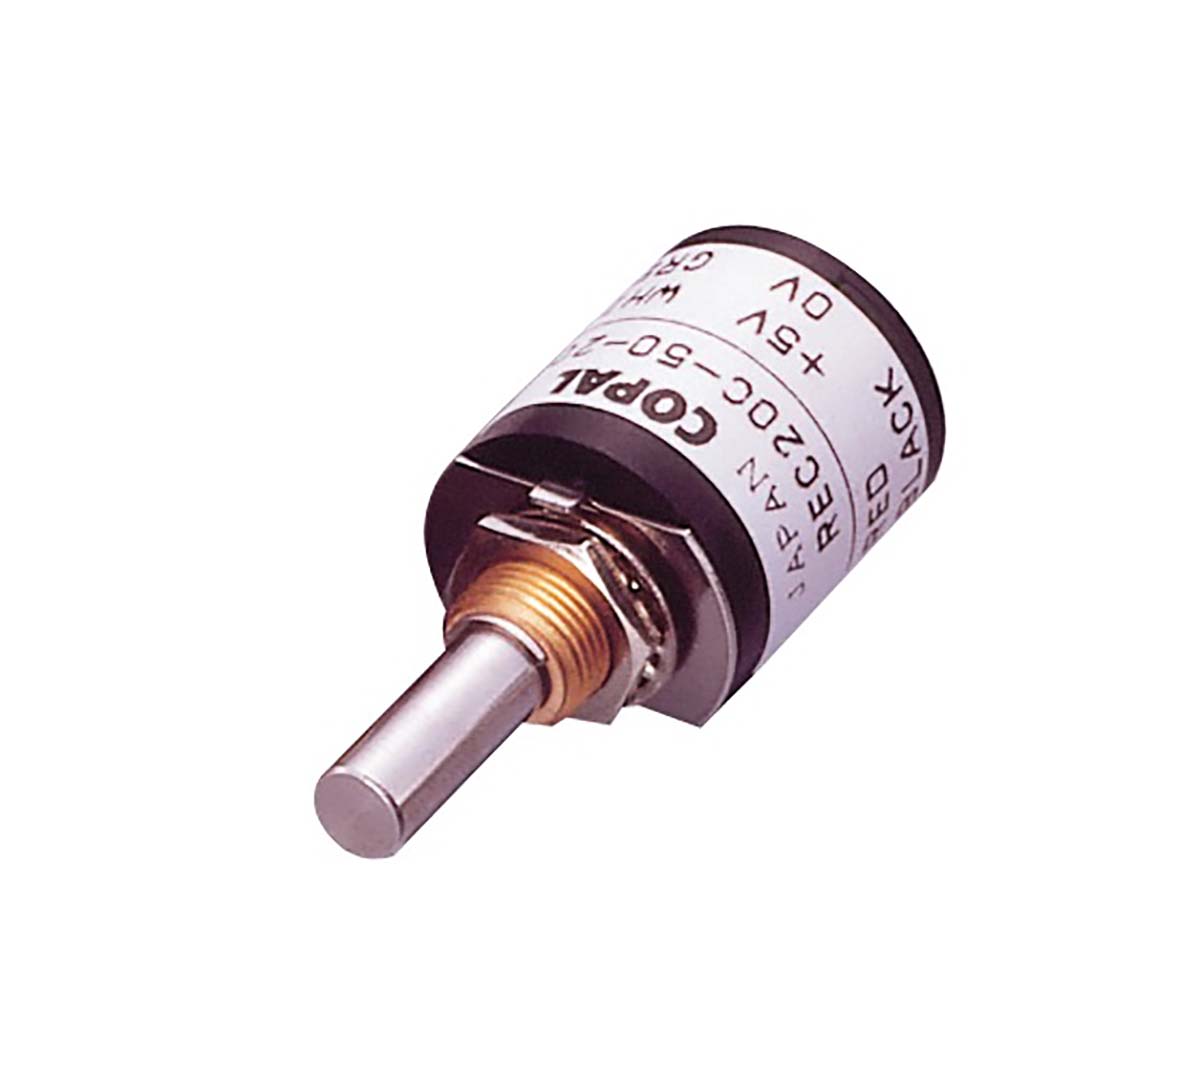 Copal Electronics 5V dc 50 Pulse Optical Encoder with a 20 mm Slotted Shaft, Panel Mount